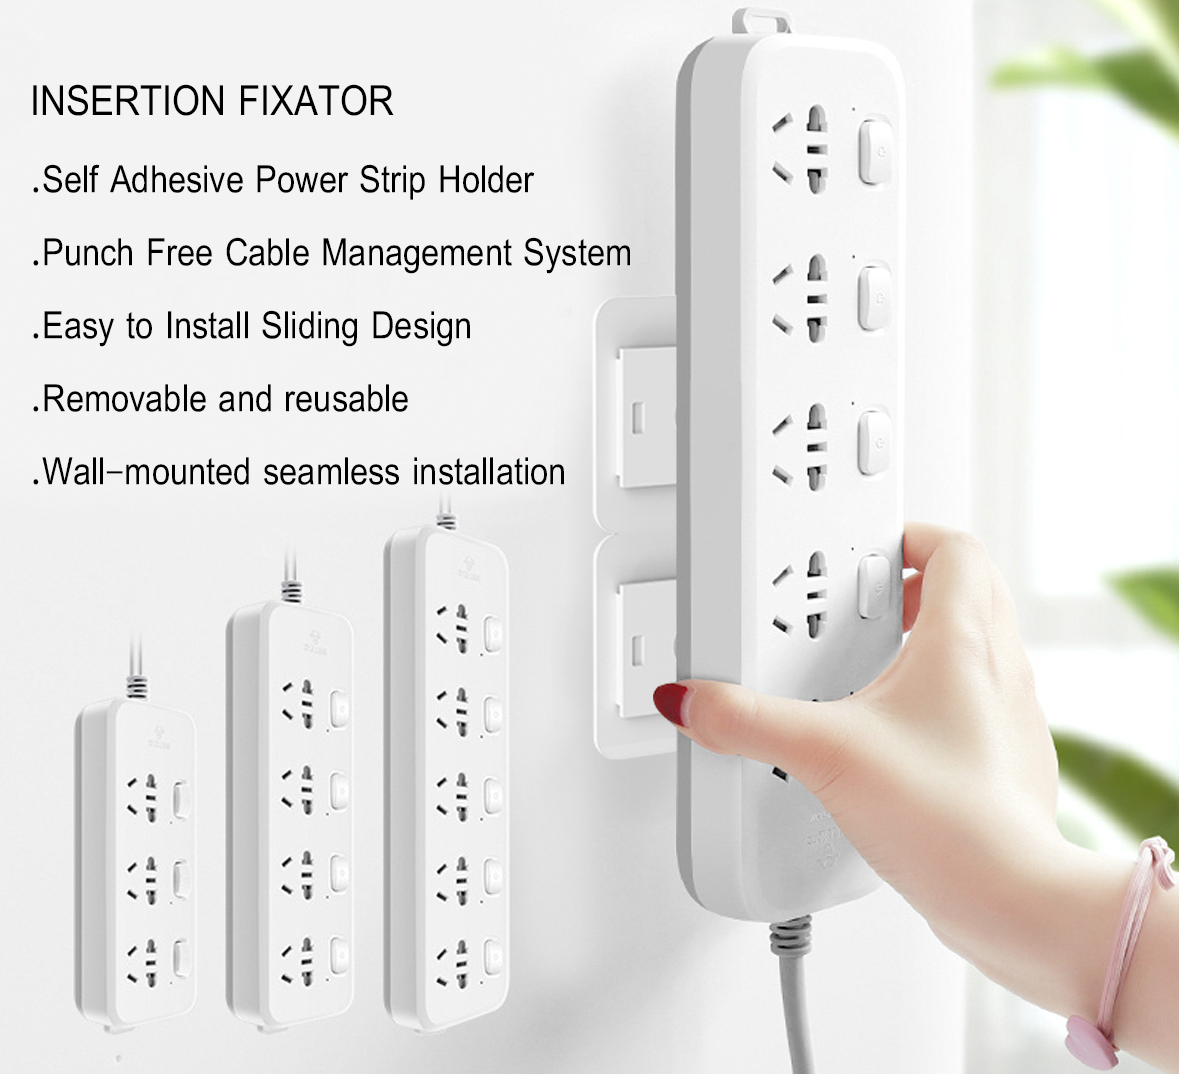 Powerboards-and-Adapters-Self-Adhesive-Power-Strip-Holder-No-Drill-Extension-Block-Wall-Mount-Fixator-Easy-to-Install-Sliding-Design-Attaches-to-Wood-Plastic-Metal-Ceramic-18